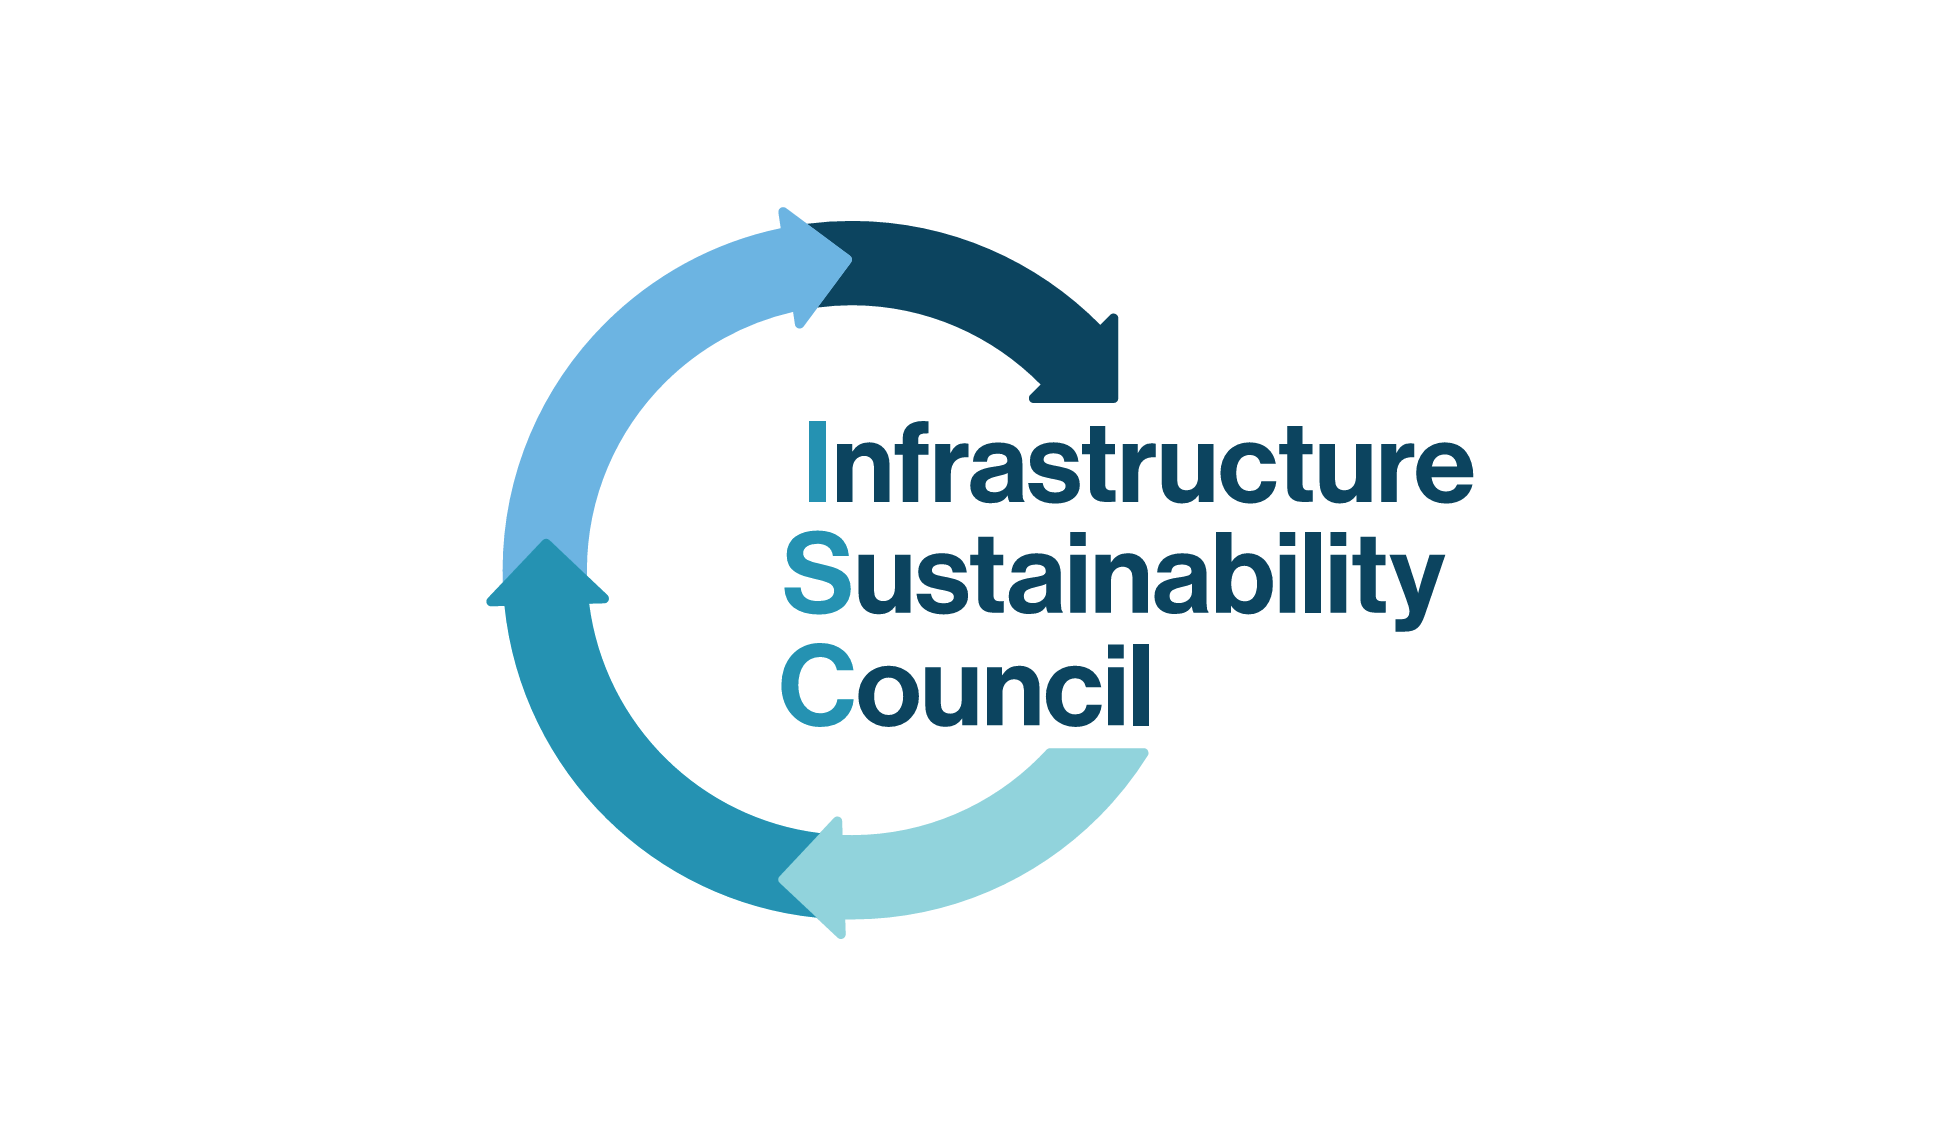 Plenary a member of Infrastructure Sustainability Council image